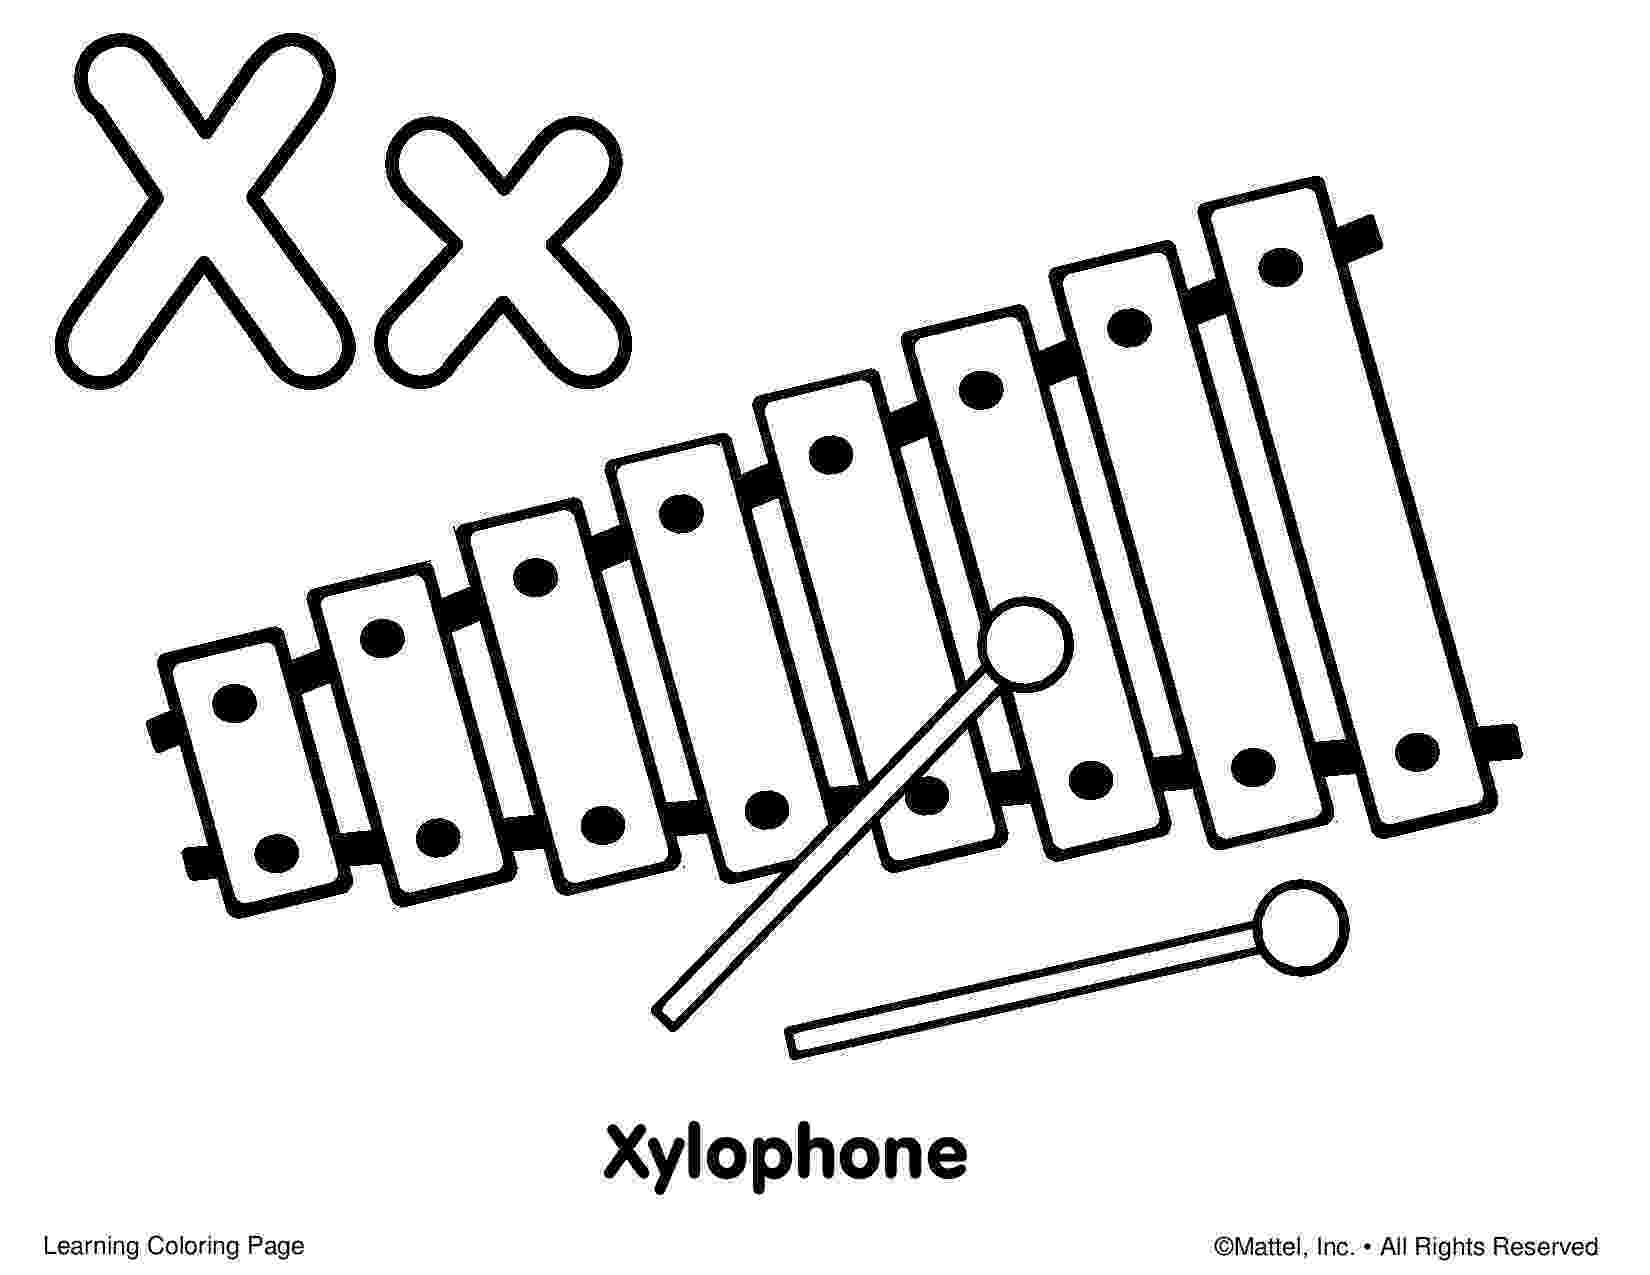 xylophone printable coloring page xylophone coloring page at getcoloringscom free xylophone coloring page printable 